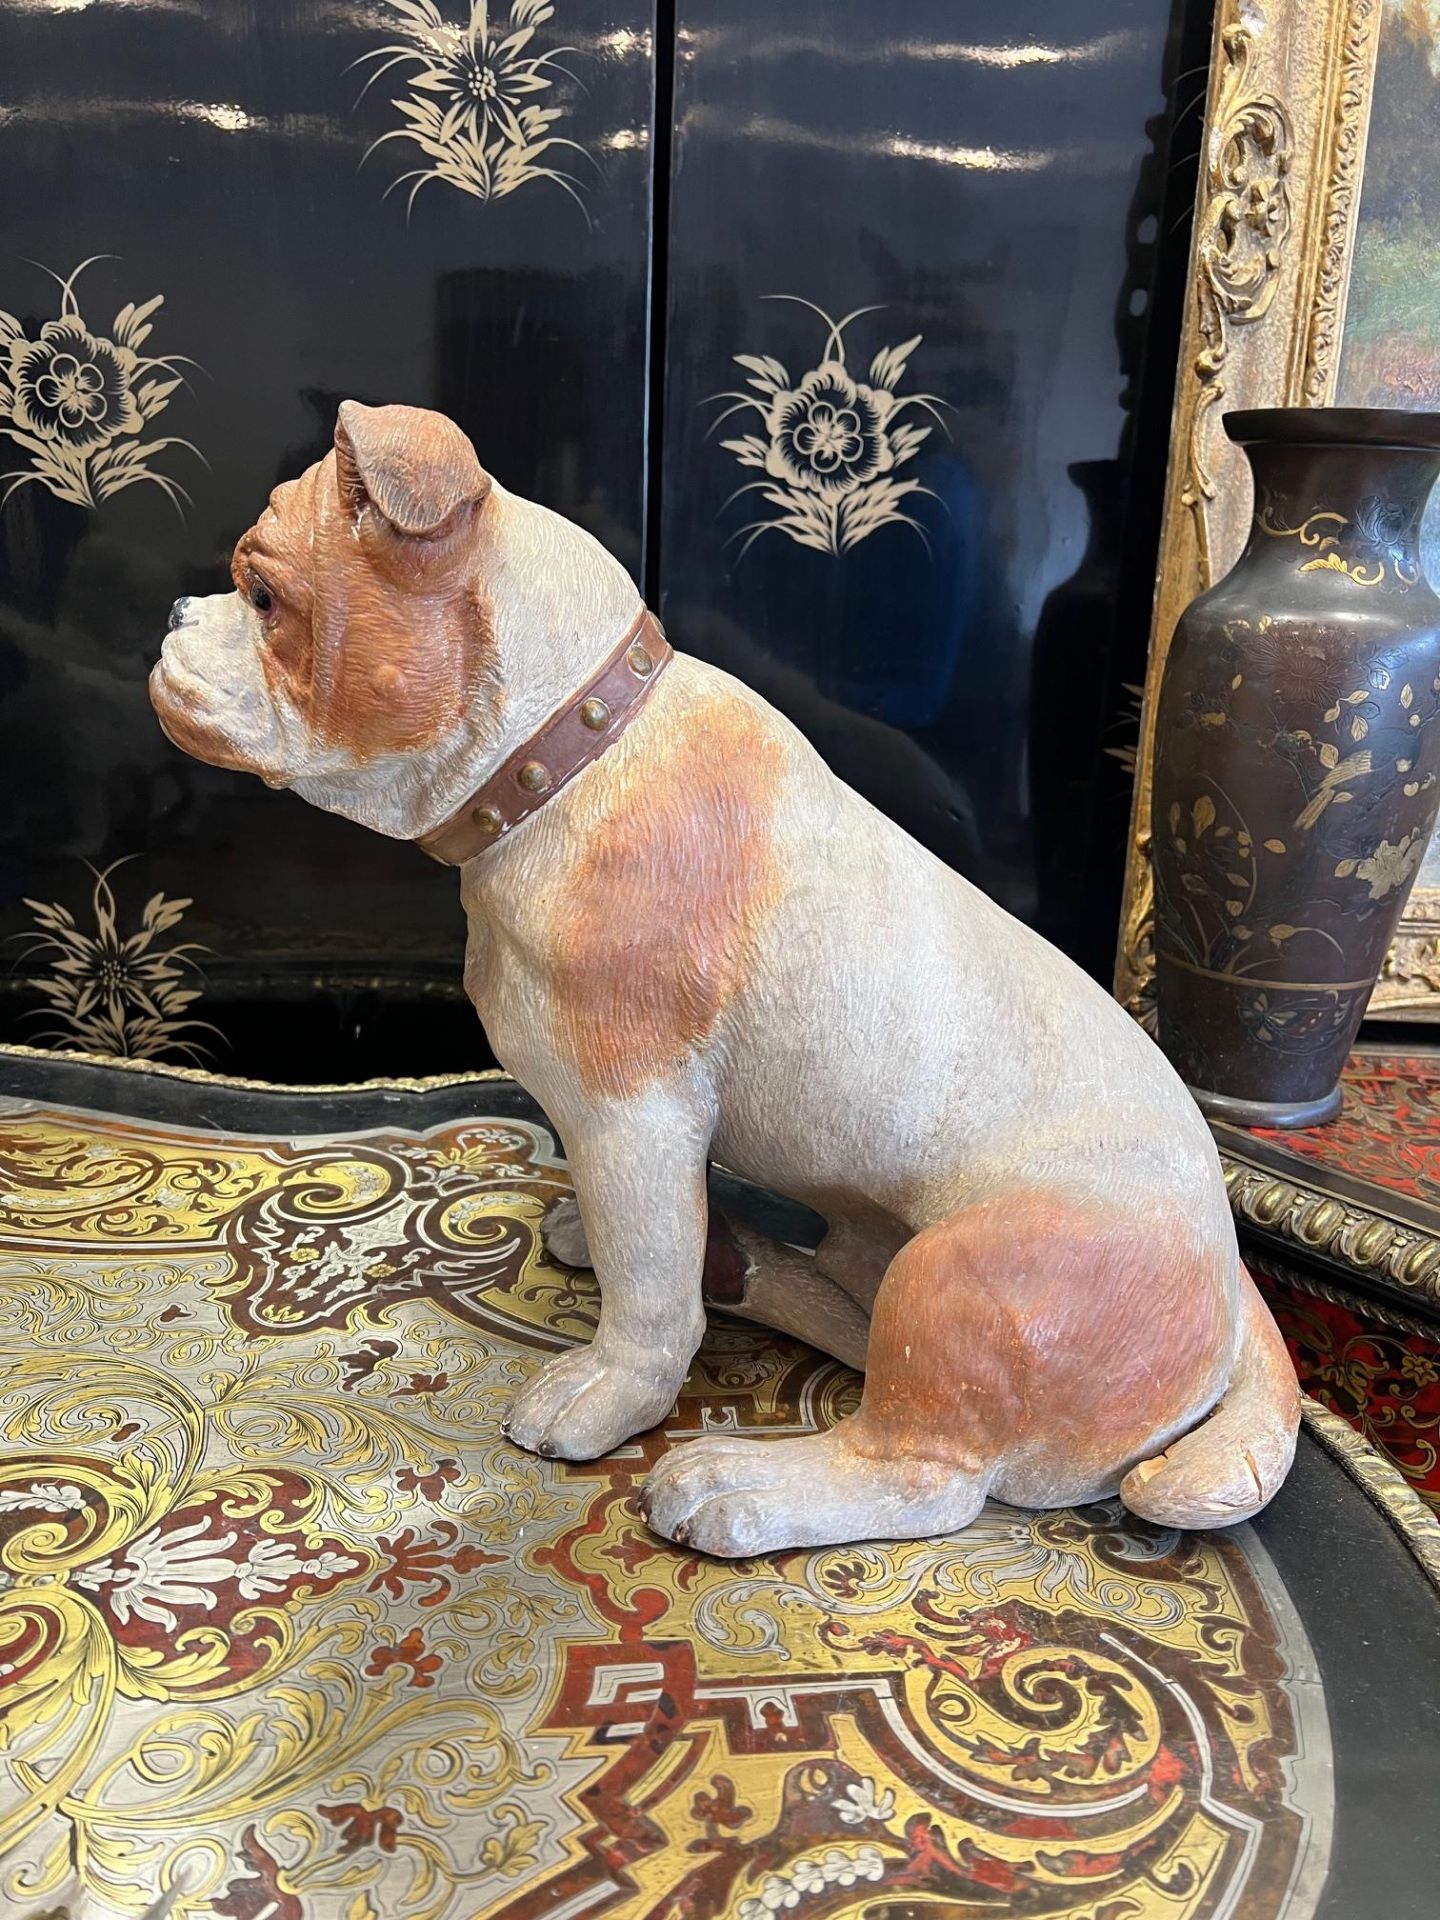 AN EARLY 20TH CENTURY PAINTED TERRACOTTA MODEL OF A BULLDOG - Image 6 of 6